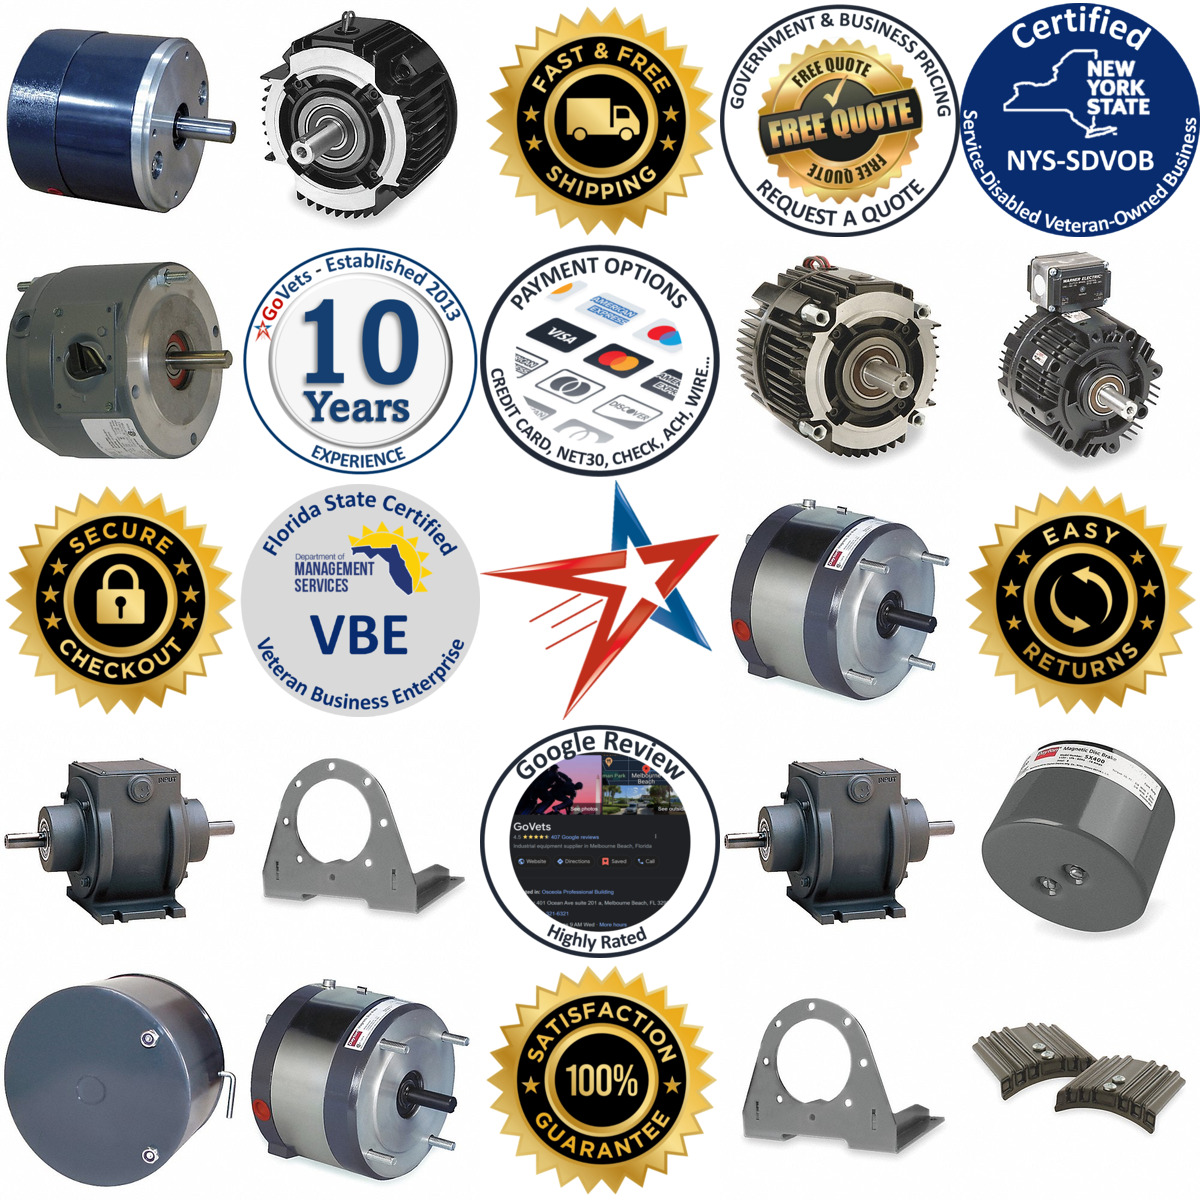 A selection of Brakes and Clutches products on GoVets